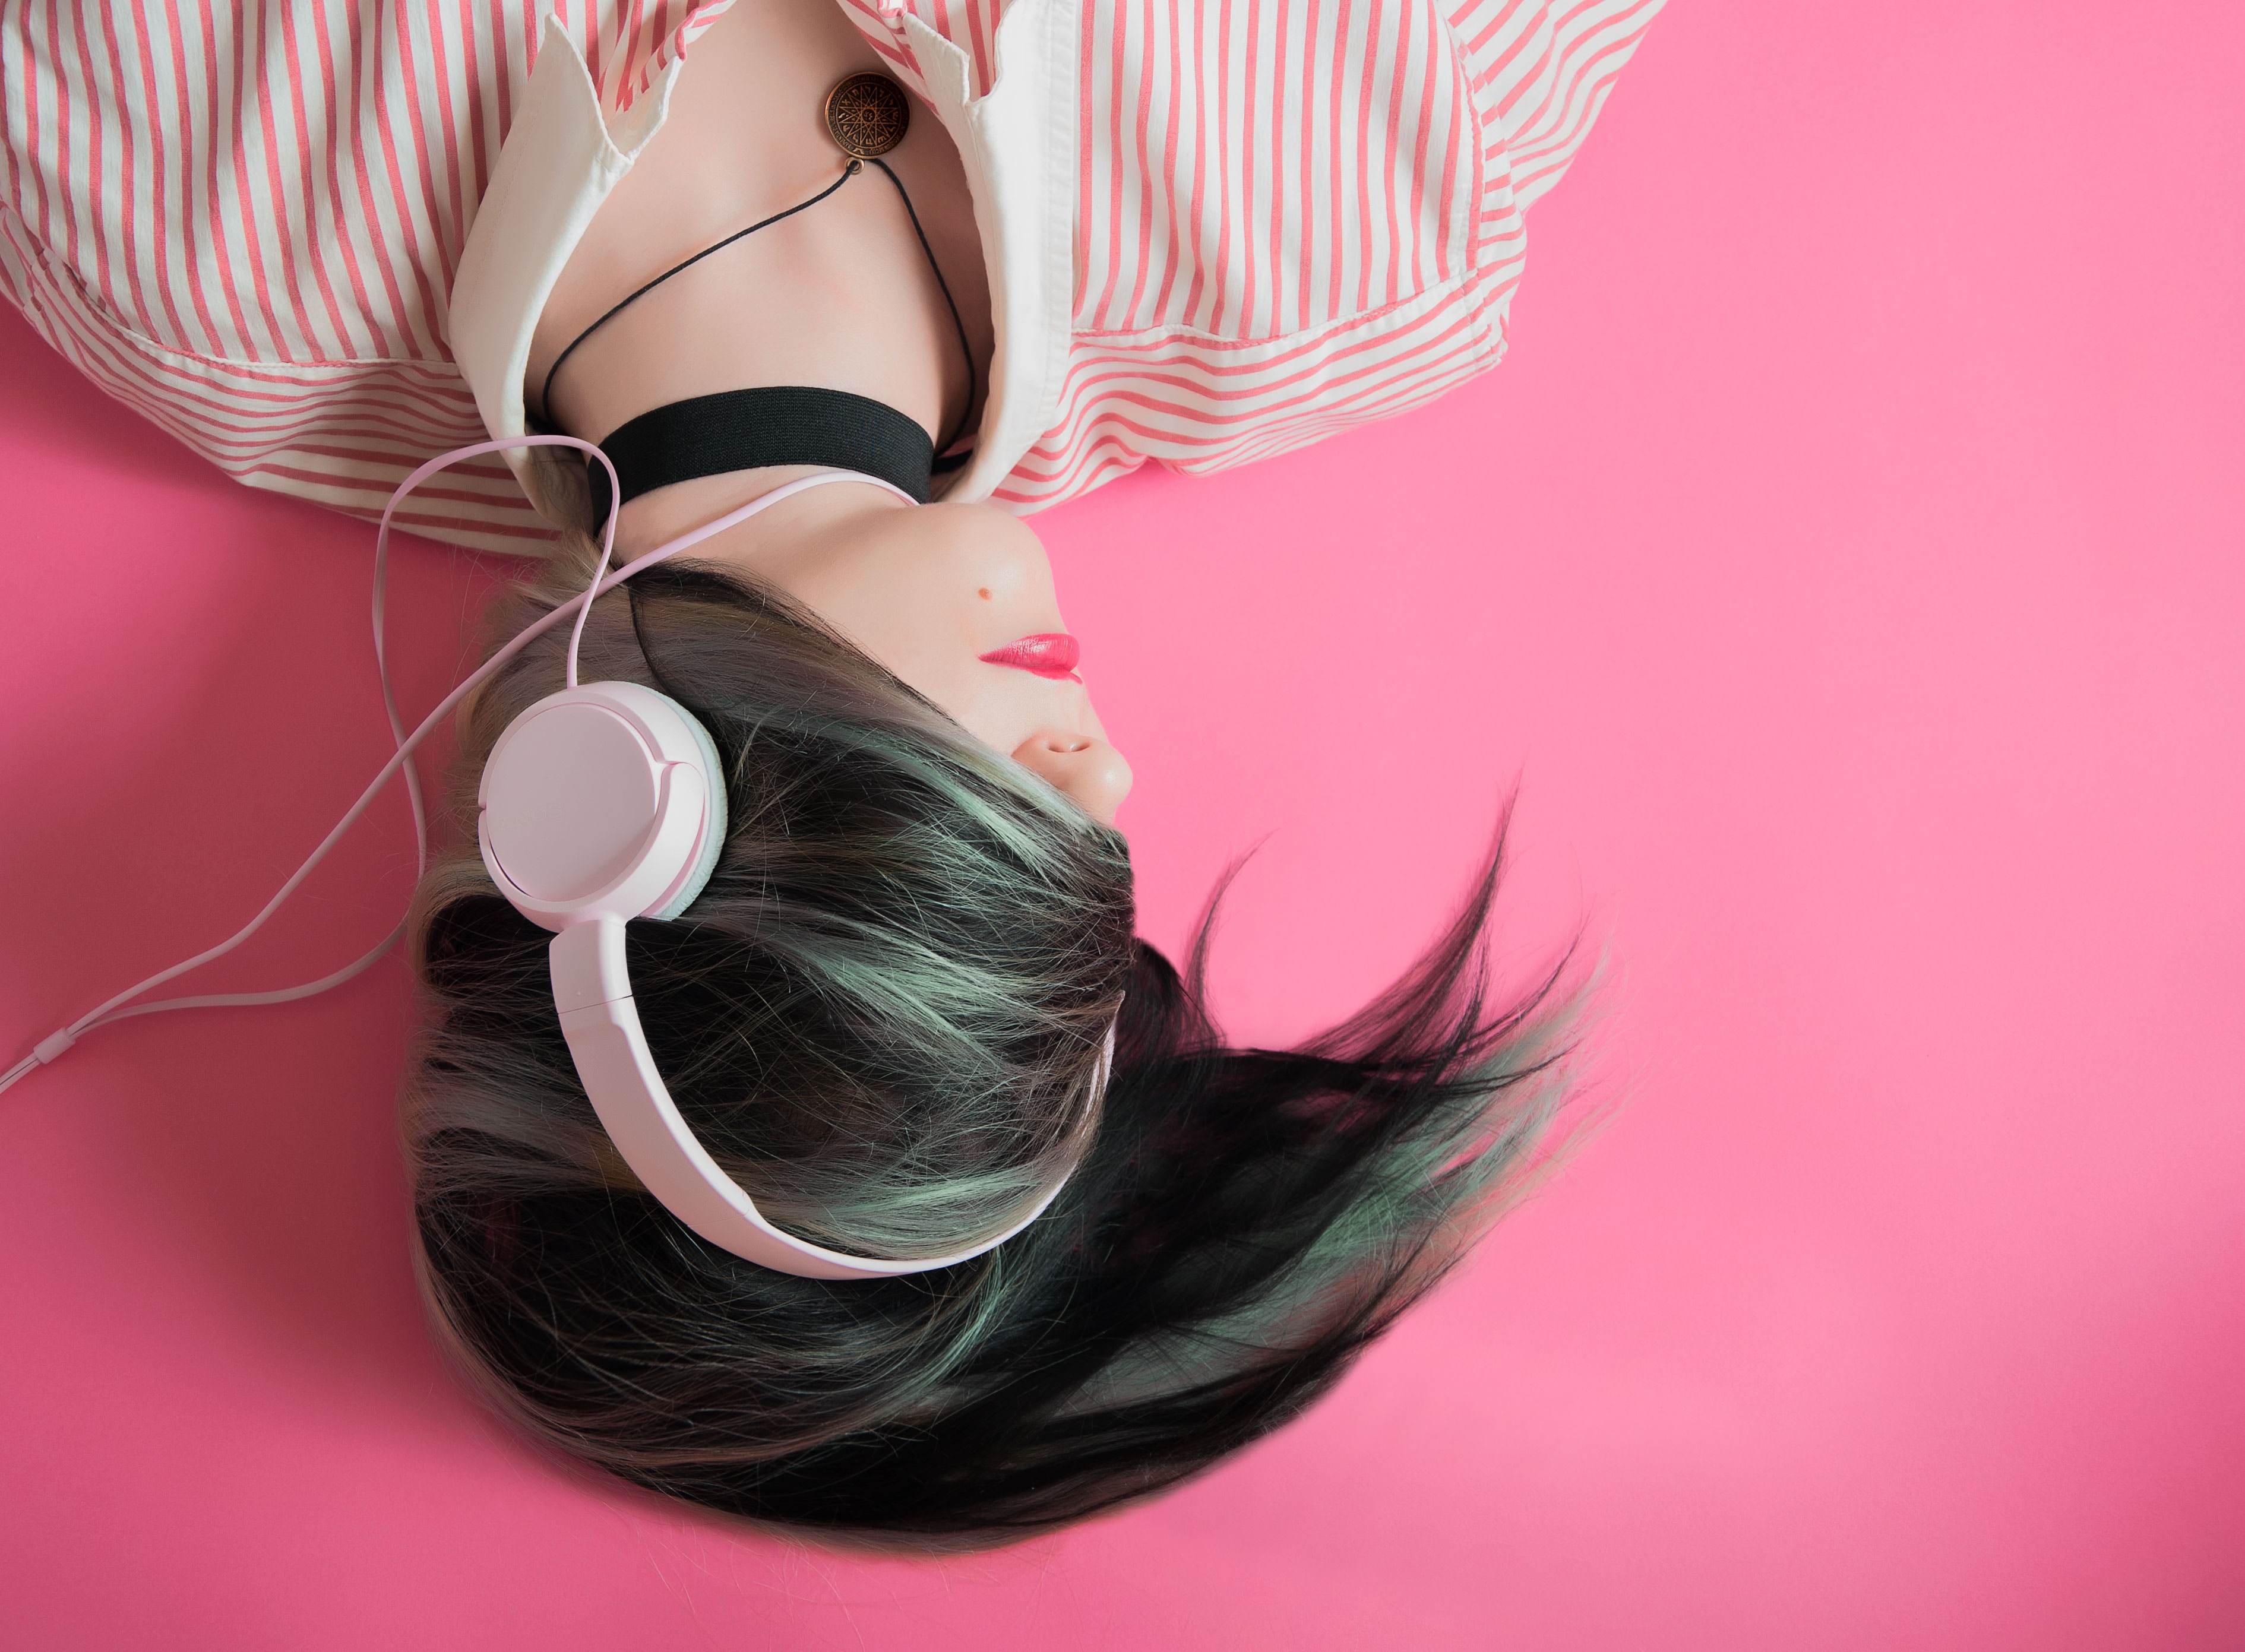 Person with headphones against a pink background